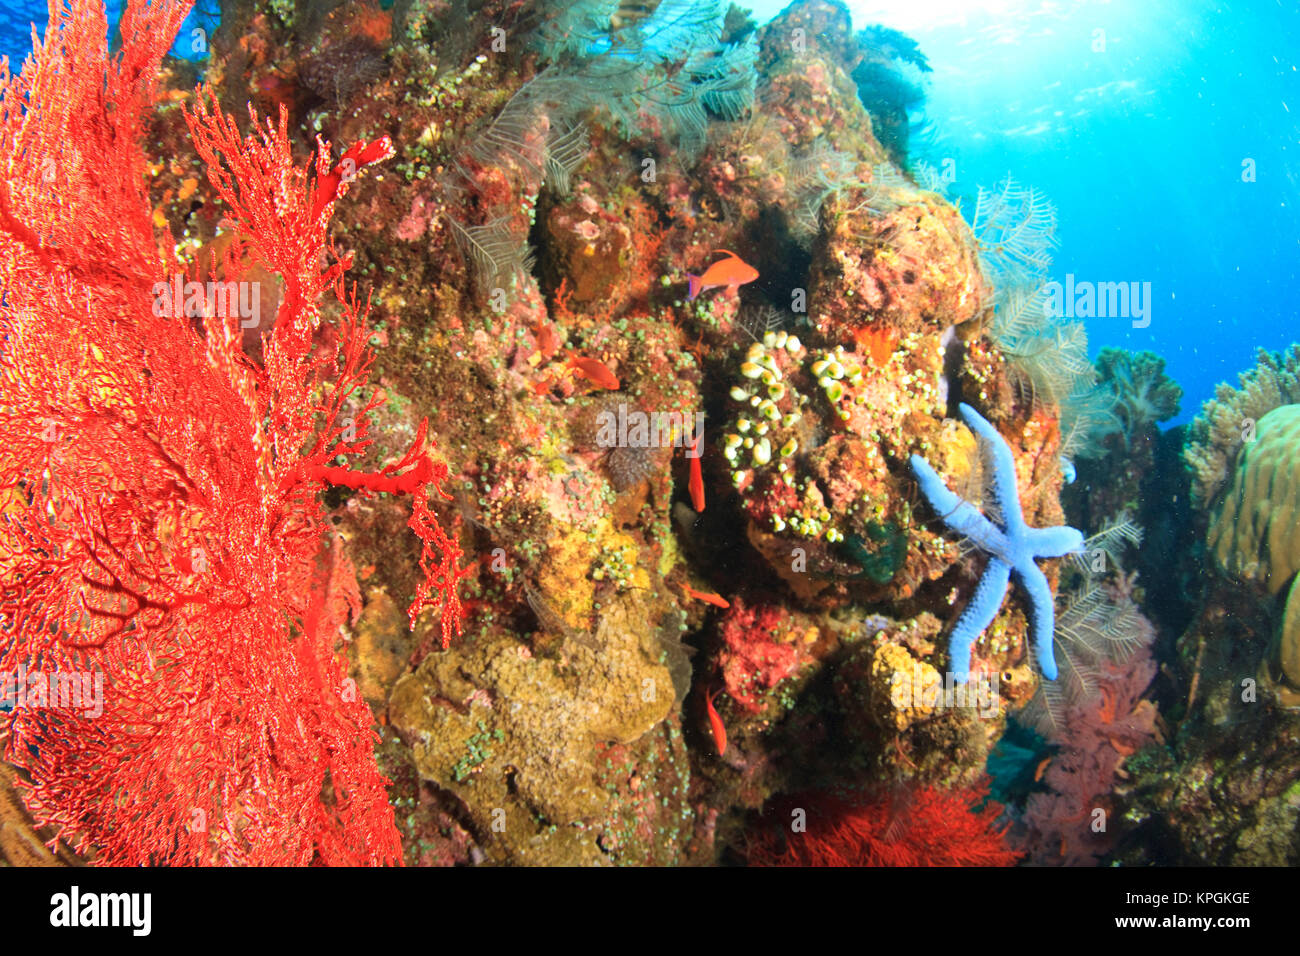 Underwater view of Red Sea Fans (Melithaea sp.) and Blue Sea Star (Linckia laeviagata), Komba Island, Flores Sea, Indonesia Stock Photo